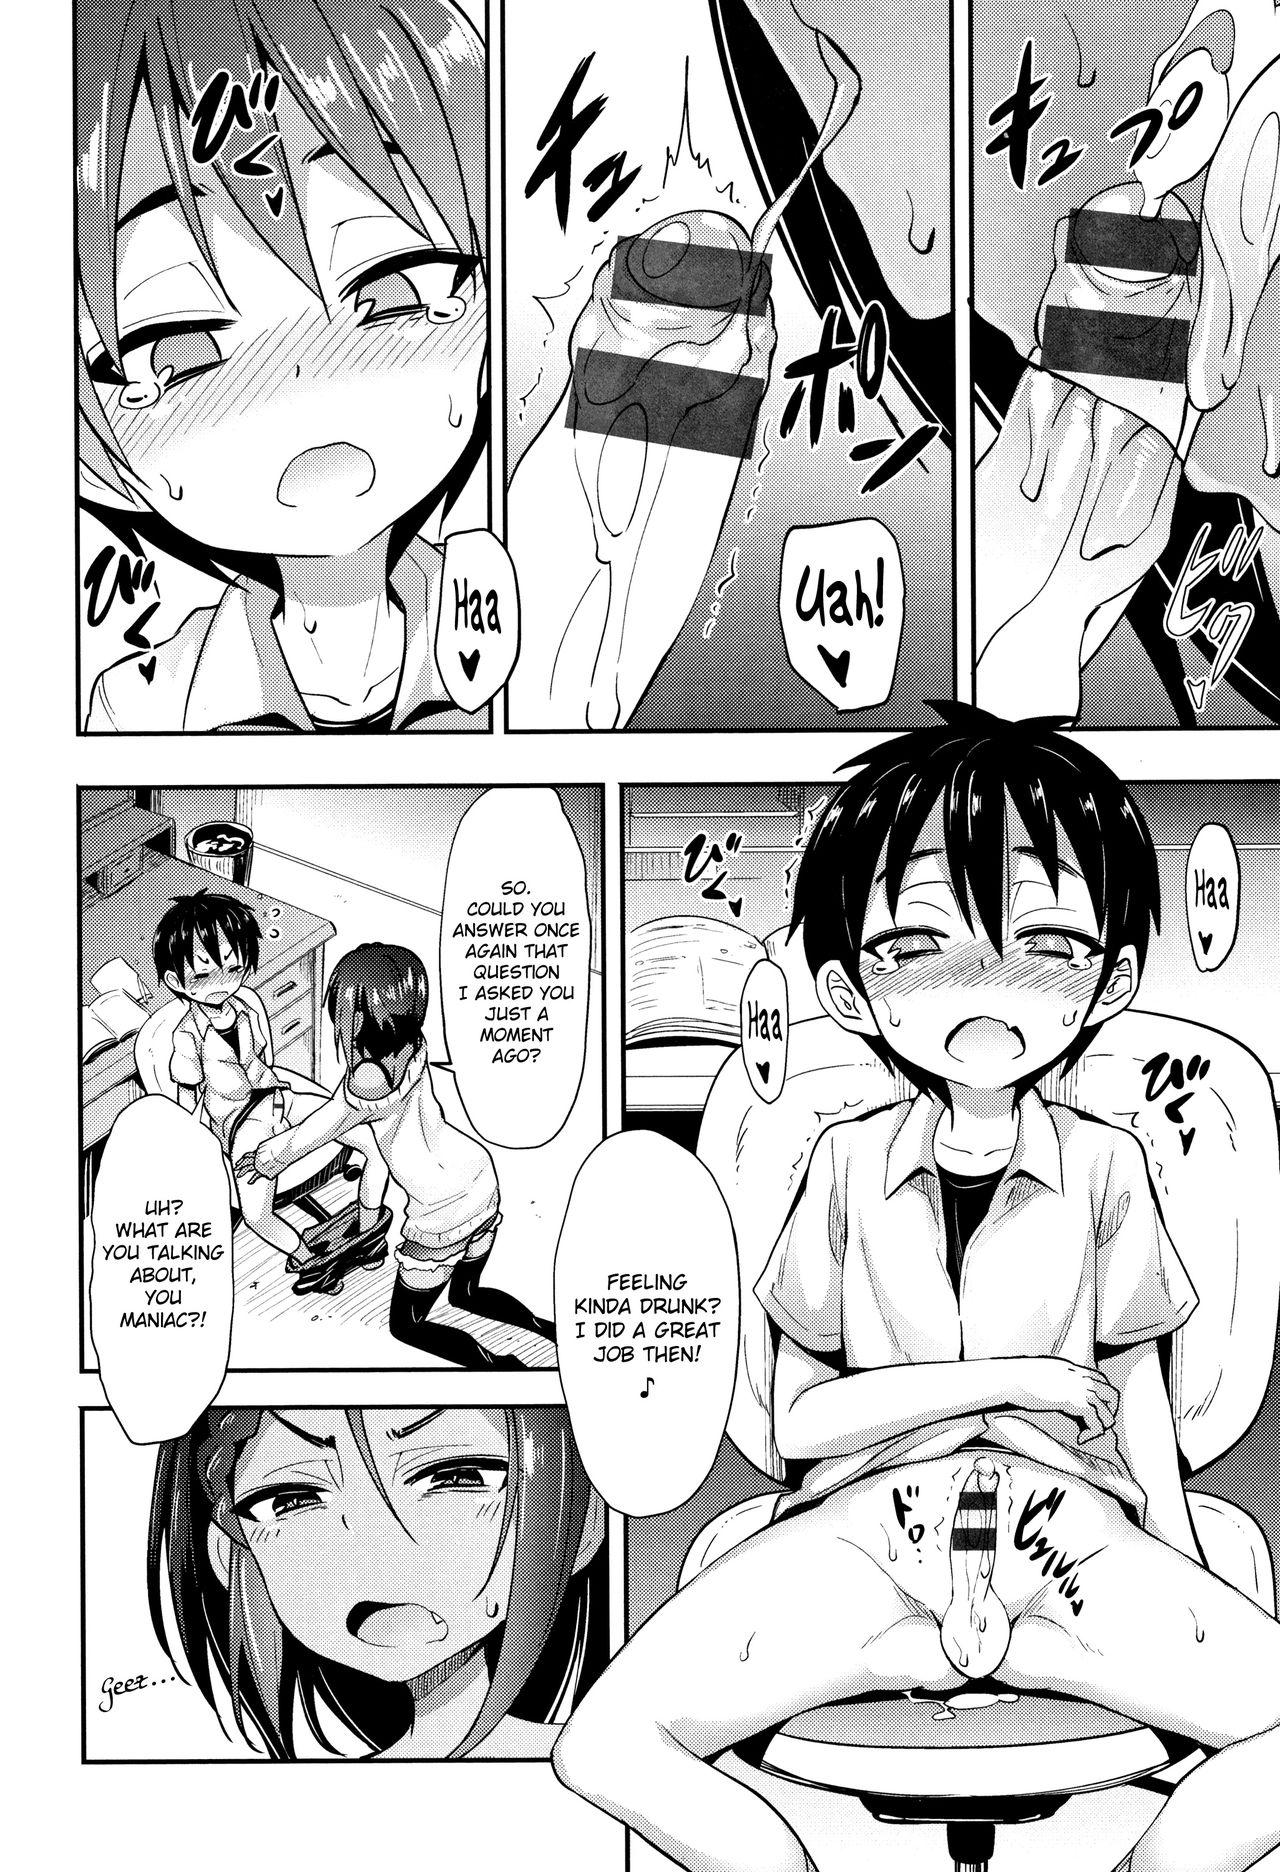 Fist Onee-chan to Issho | To Stay with Her Hardon - Page 6